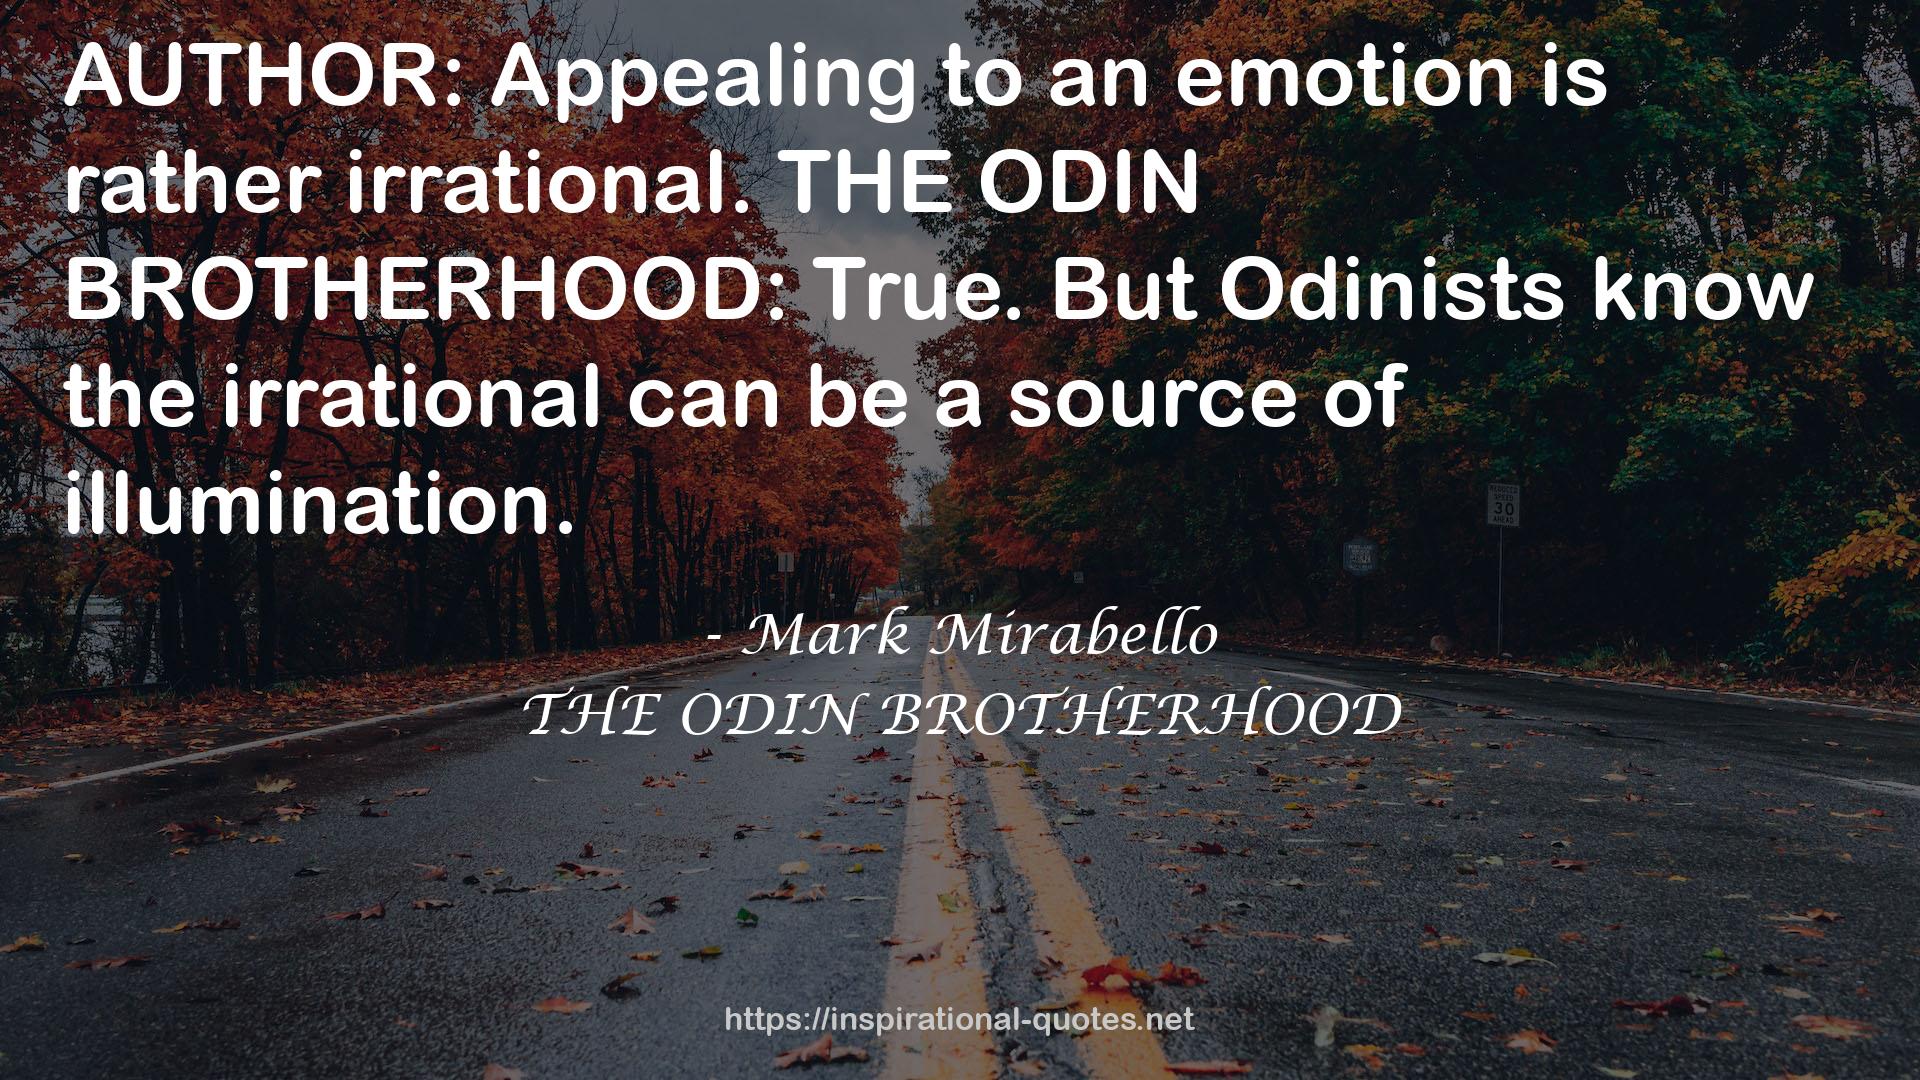 THE ODIN BROTHERHOOD QUOTES